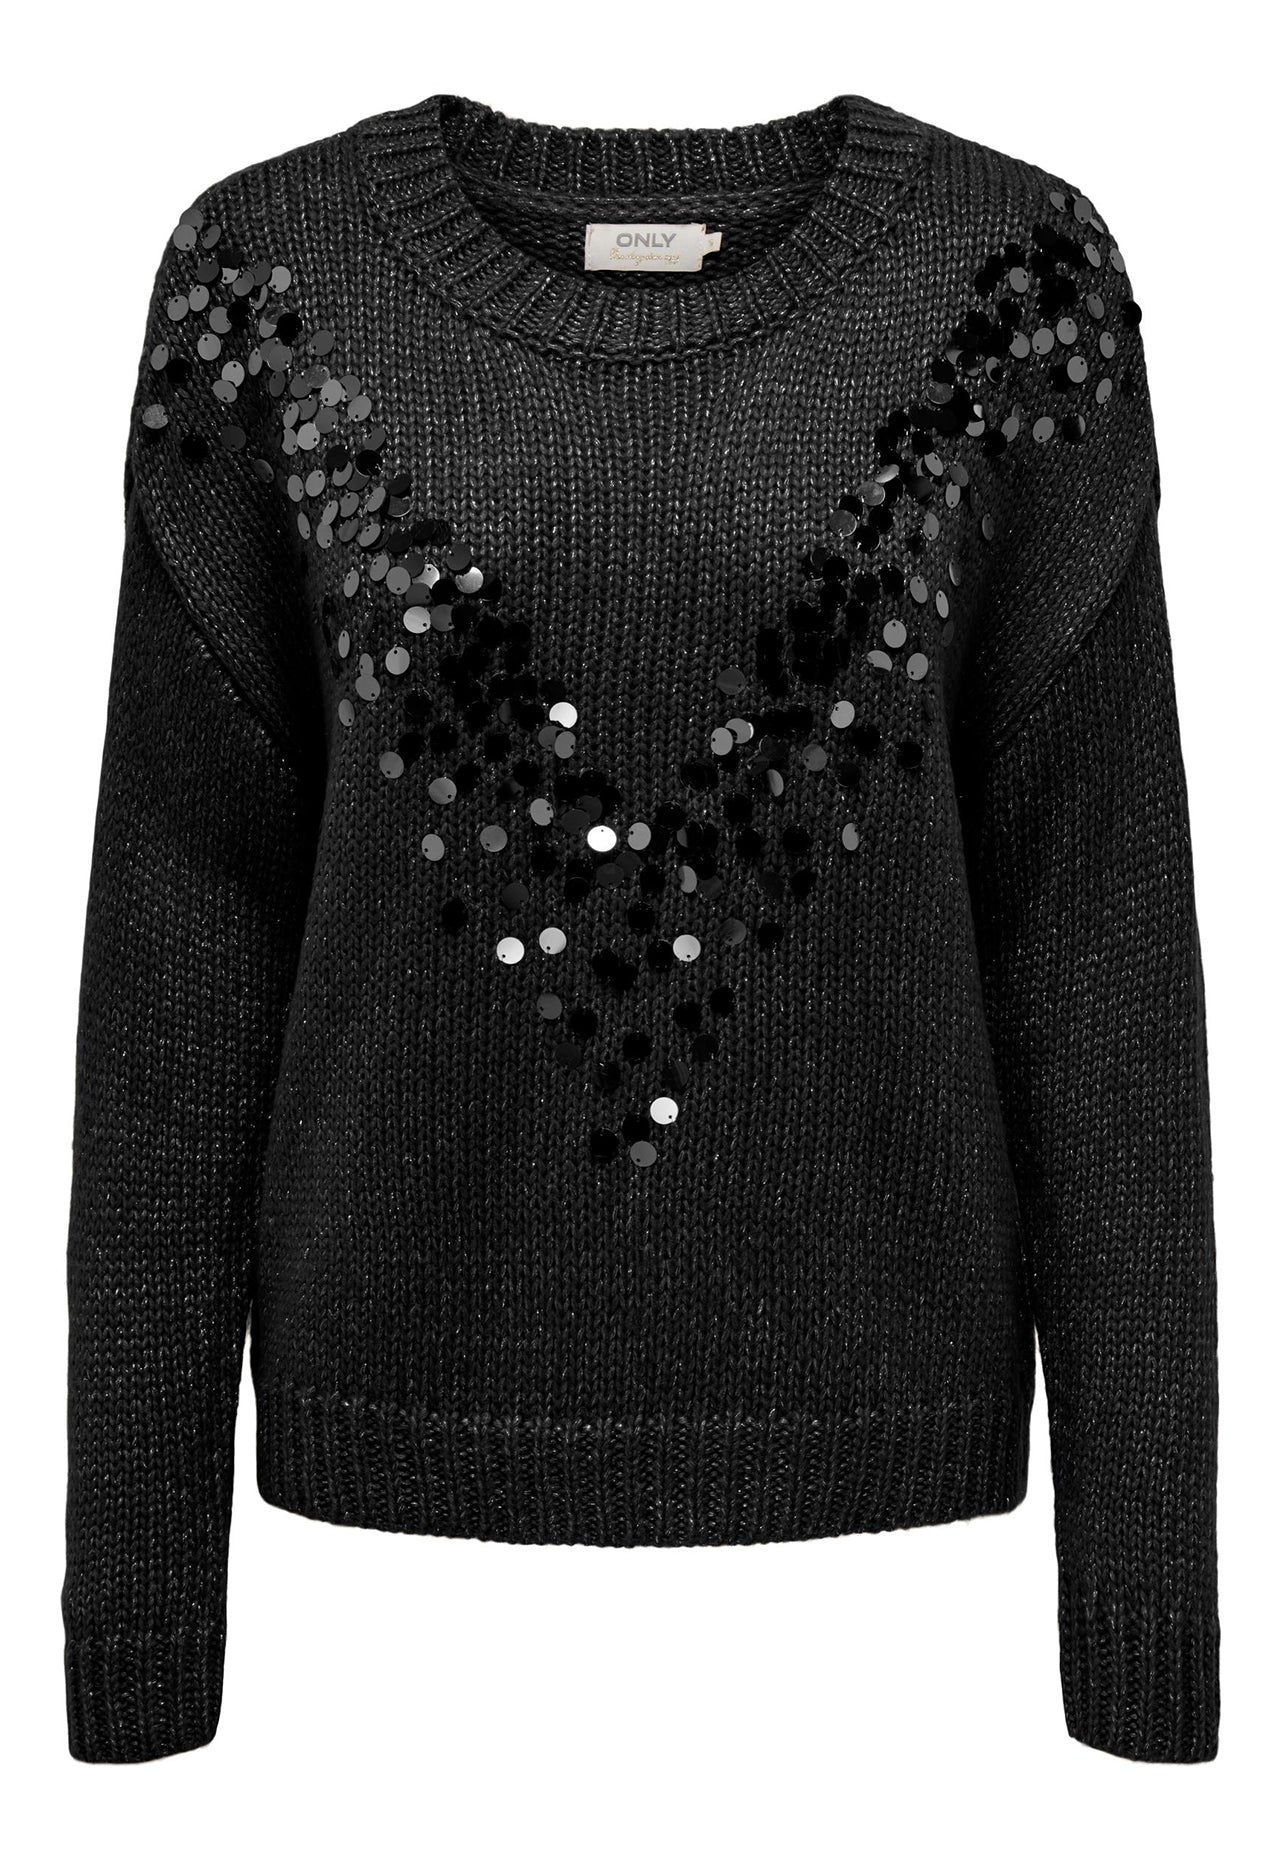 
                  
                    ONLY Nixi Metallic Lurex & Sequin Jumper in Black & Silver - One Nation Clothing
                  
                